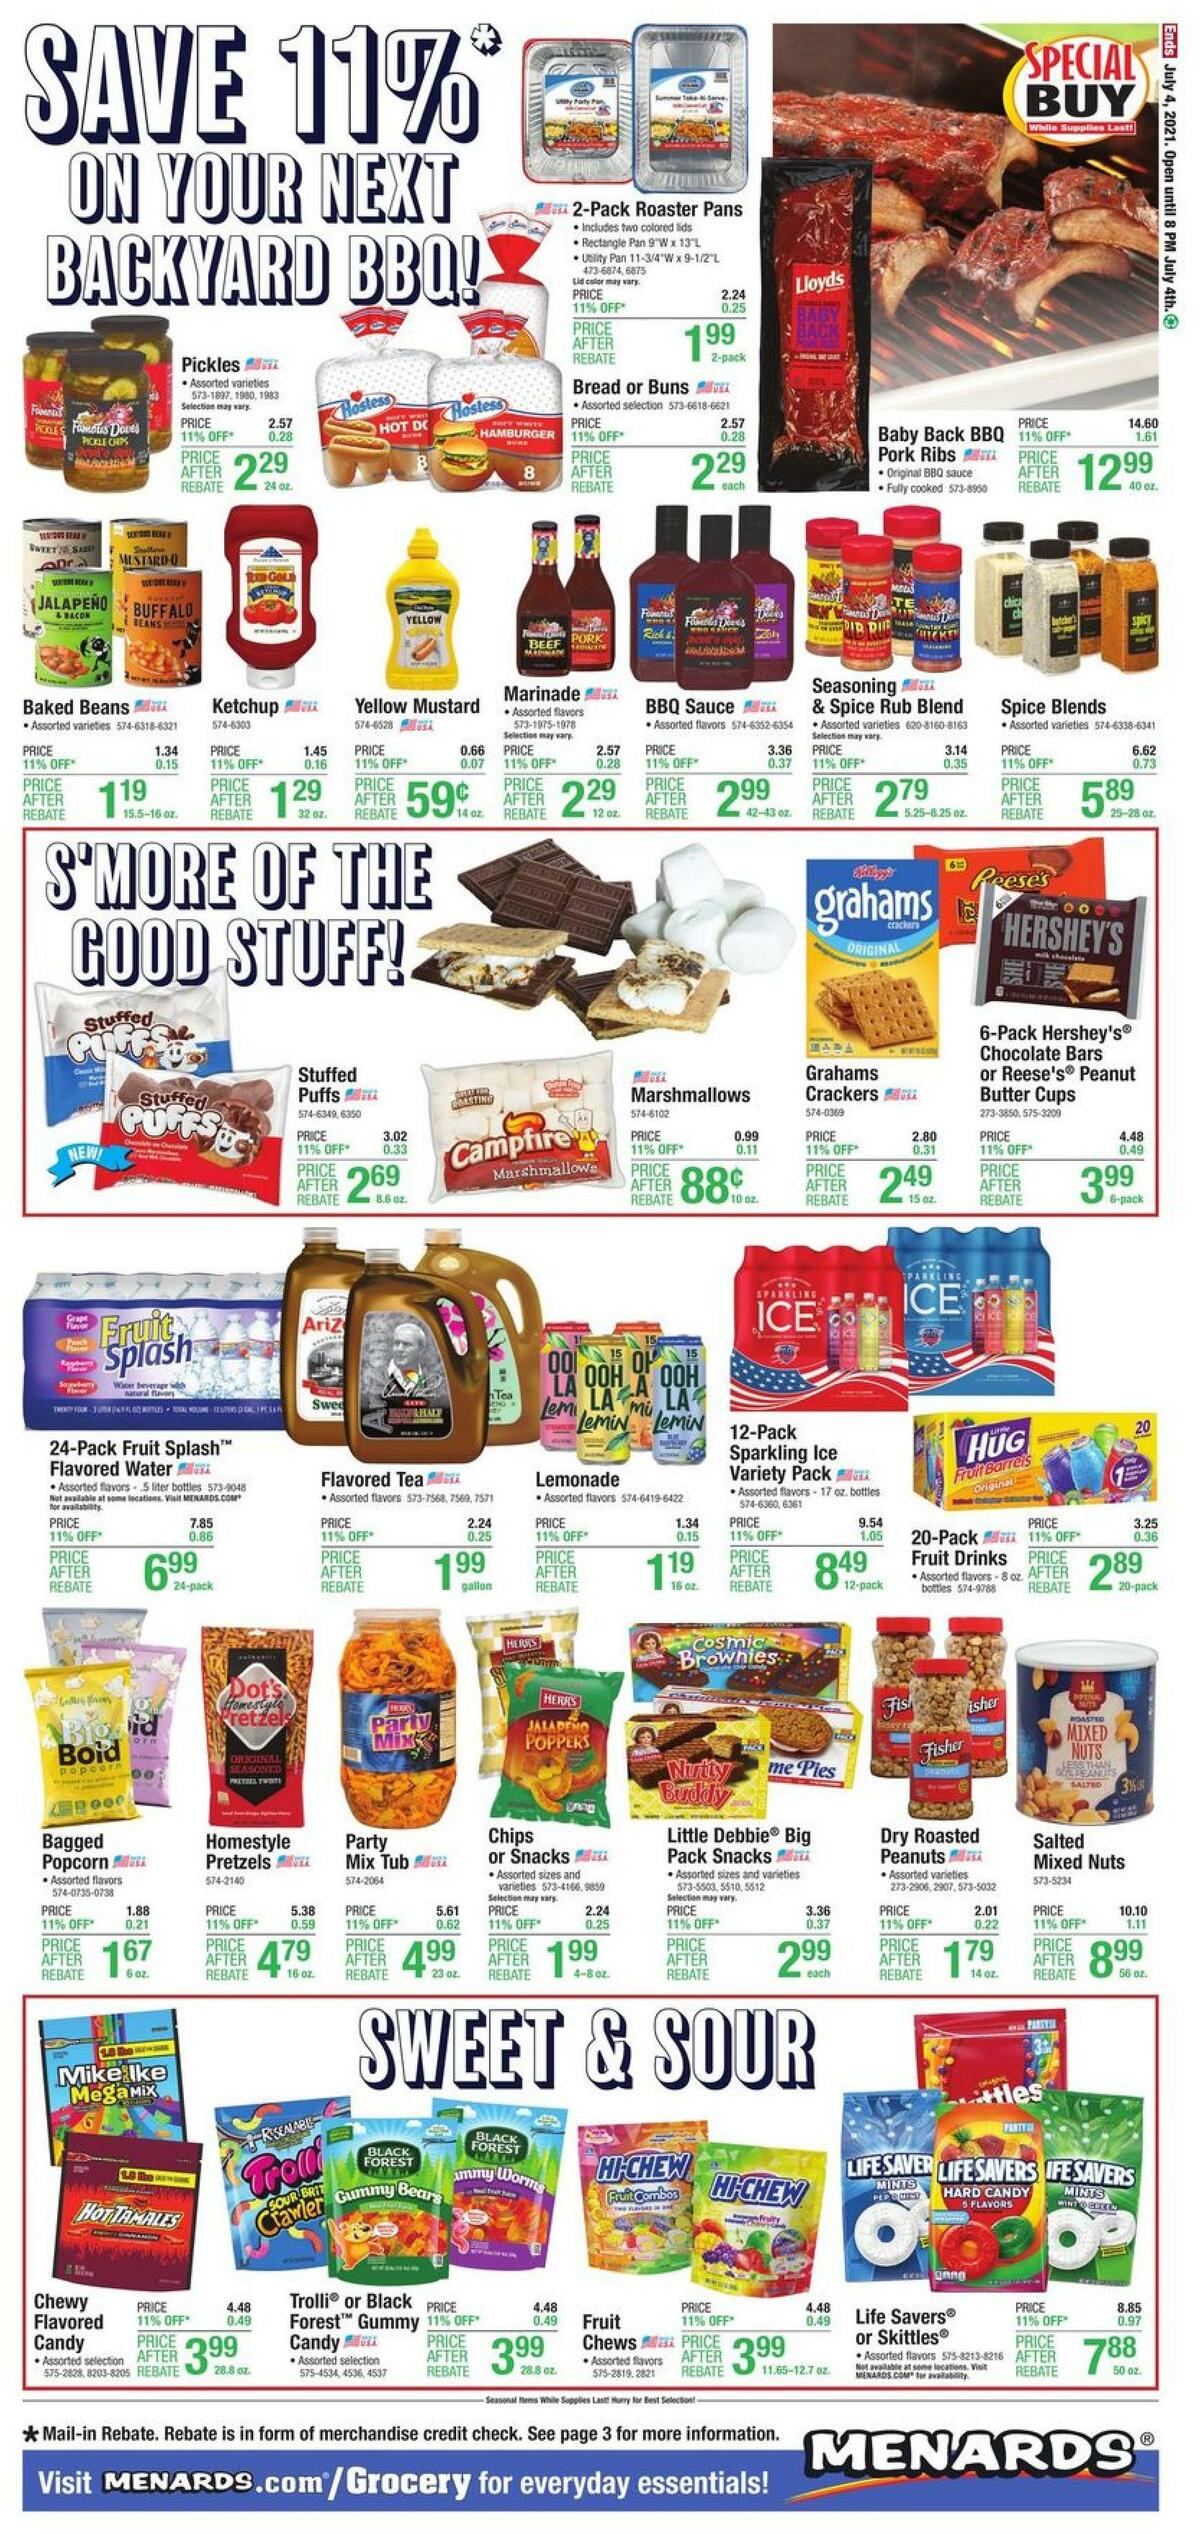 Menards 4TH OF JULY FUN! Weekly Ad from June 24